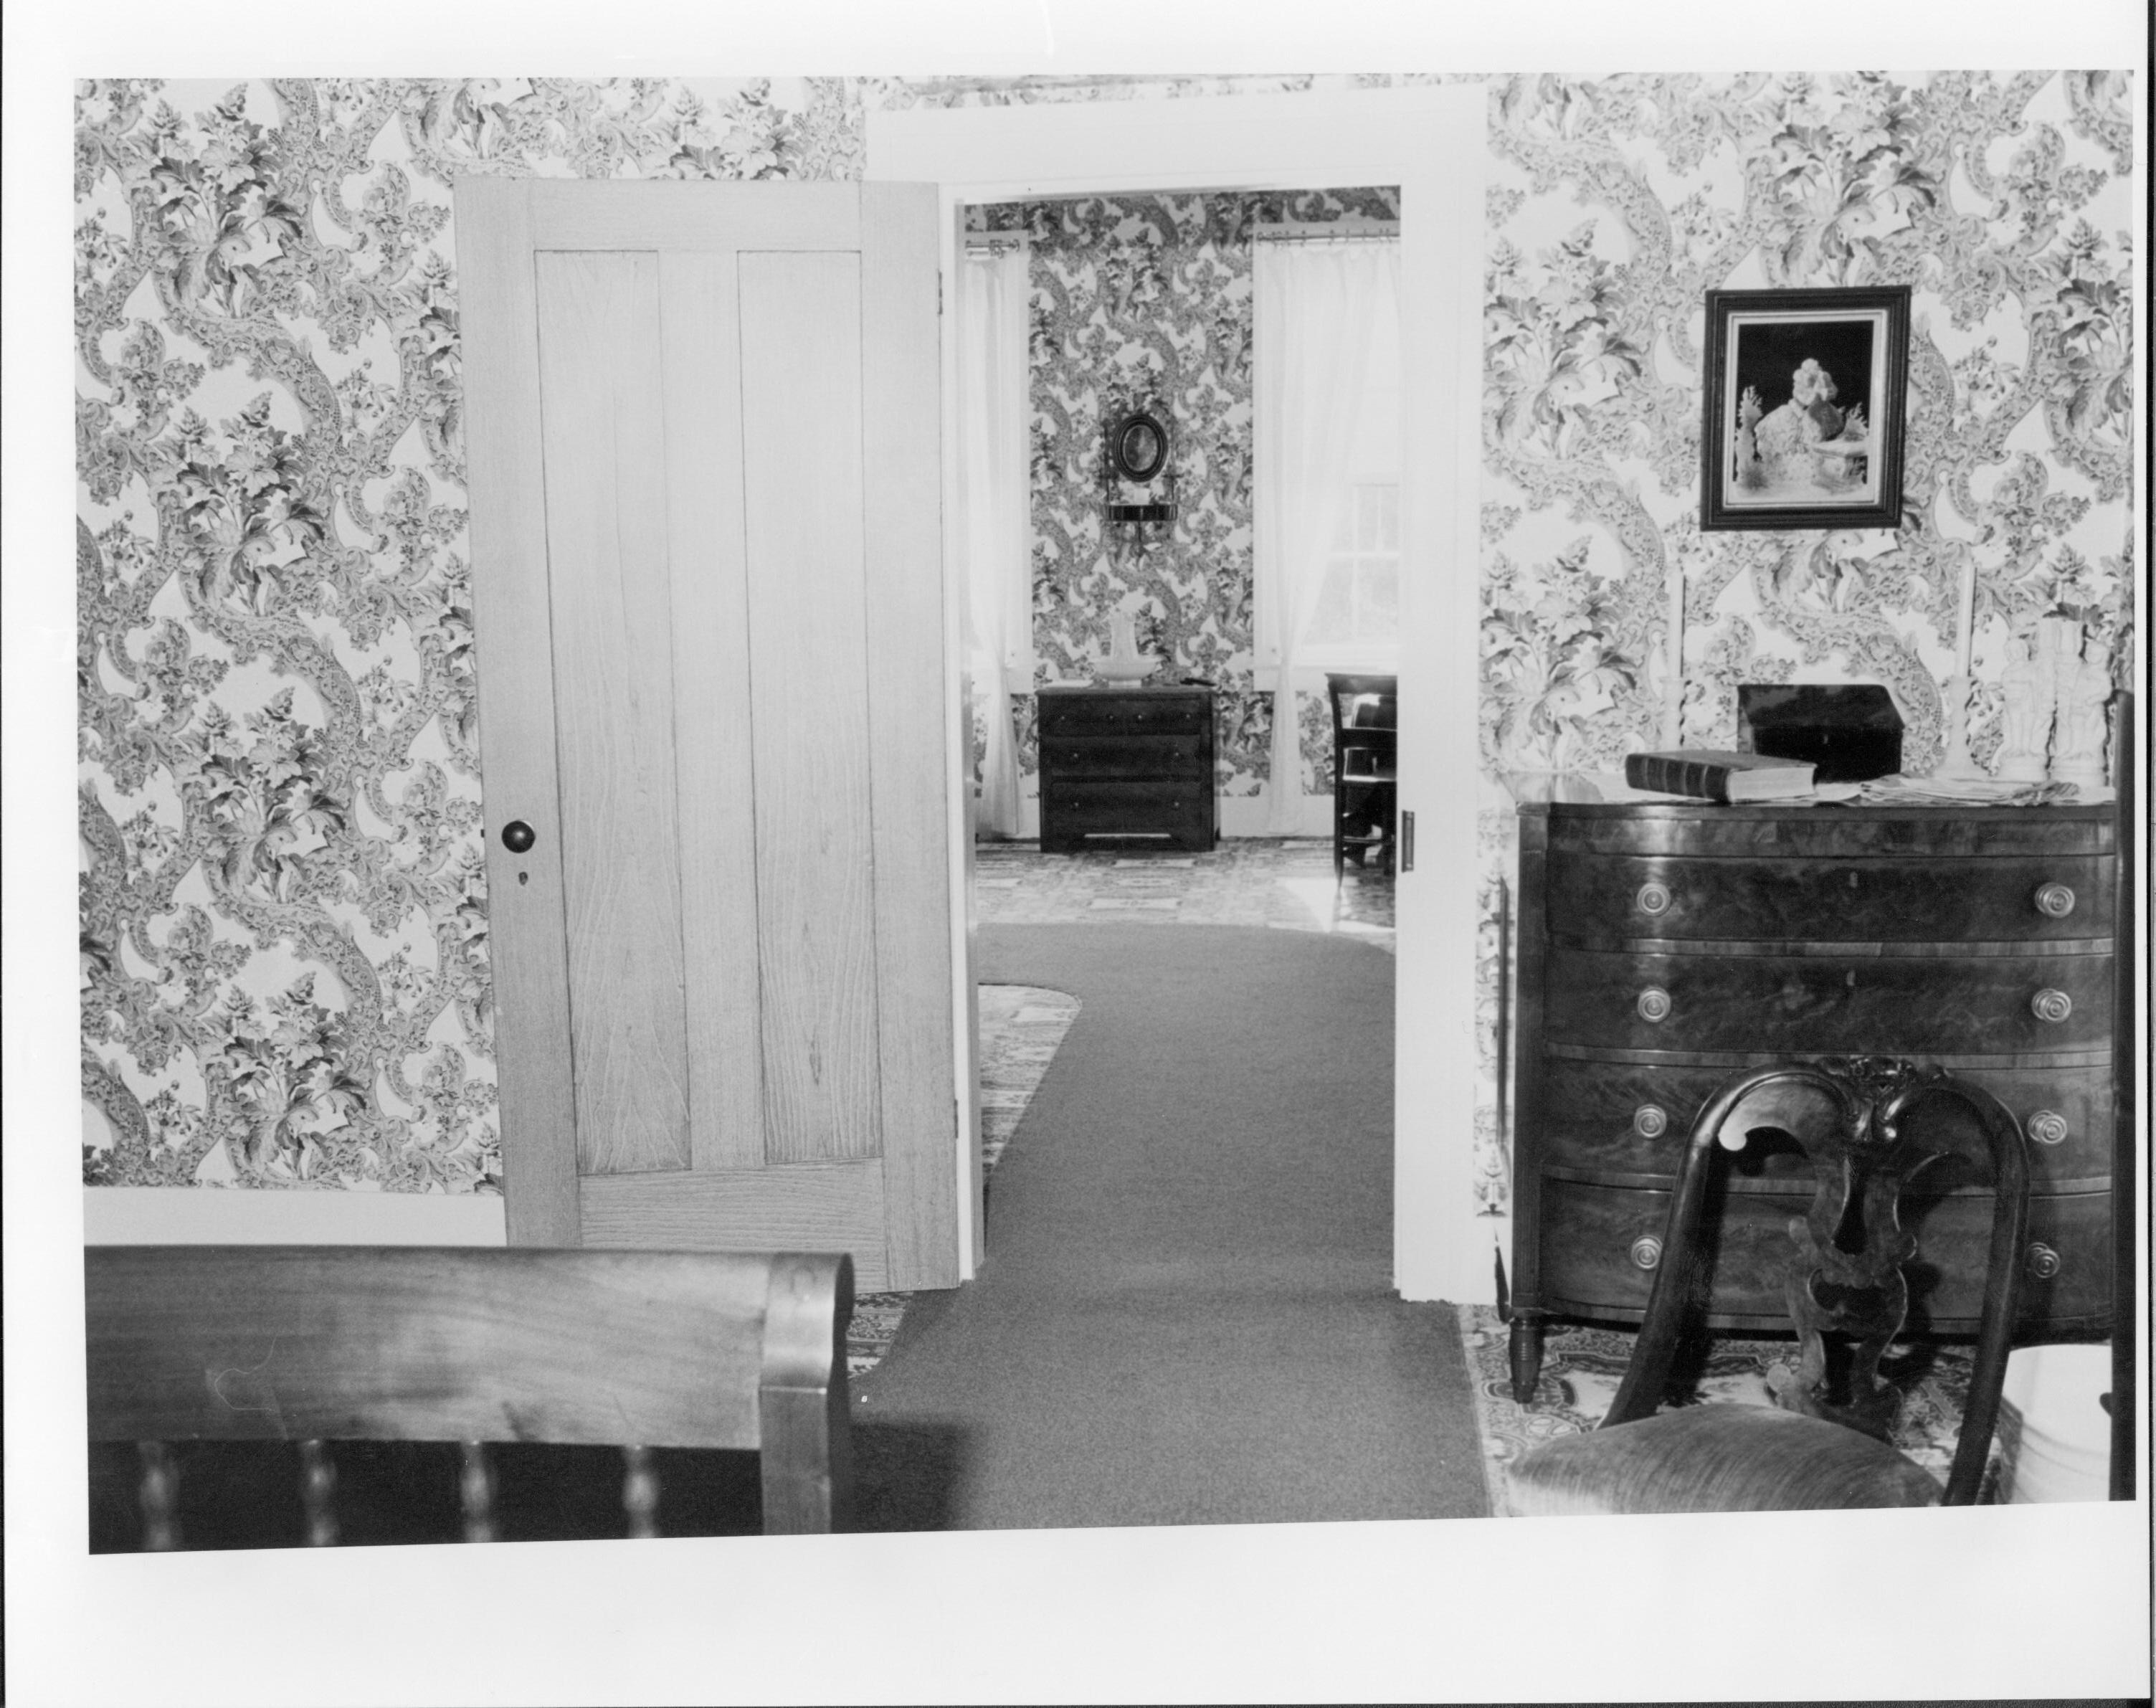 Mr. & Mrs. Lincoln's Bedroom Mrs. Lincoln's Bedroom Lincoln Home, Bedroom, Mrs. Lincoln, furnishings, view looking west into Mr. Lincoln's bedroom